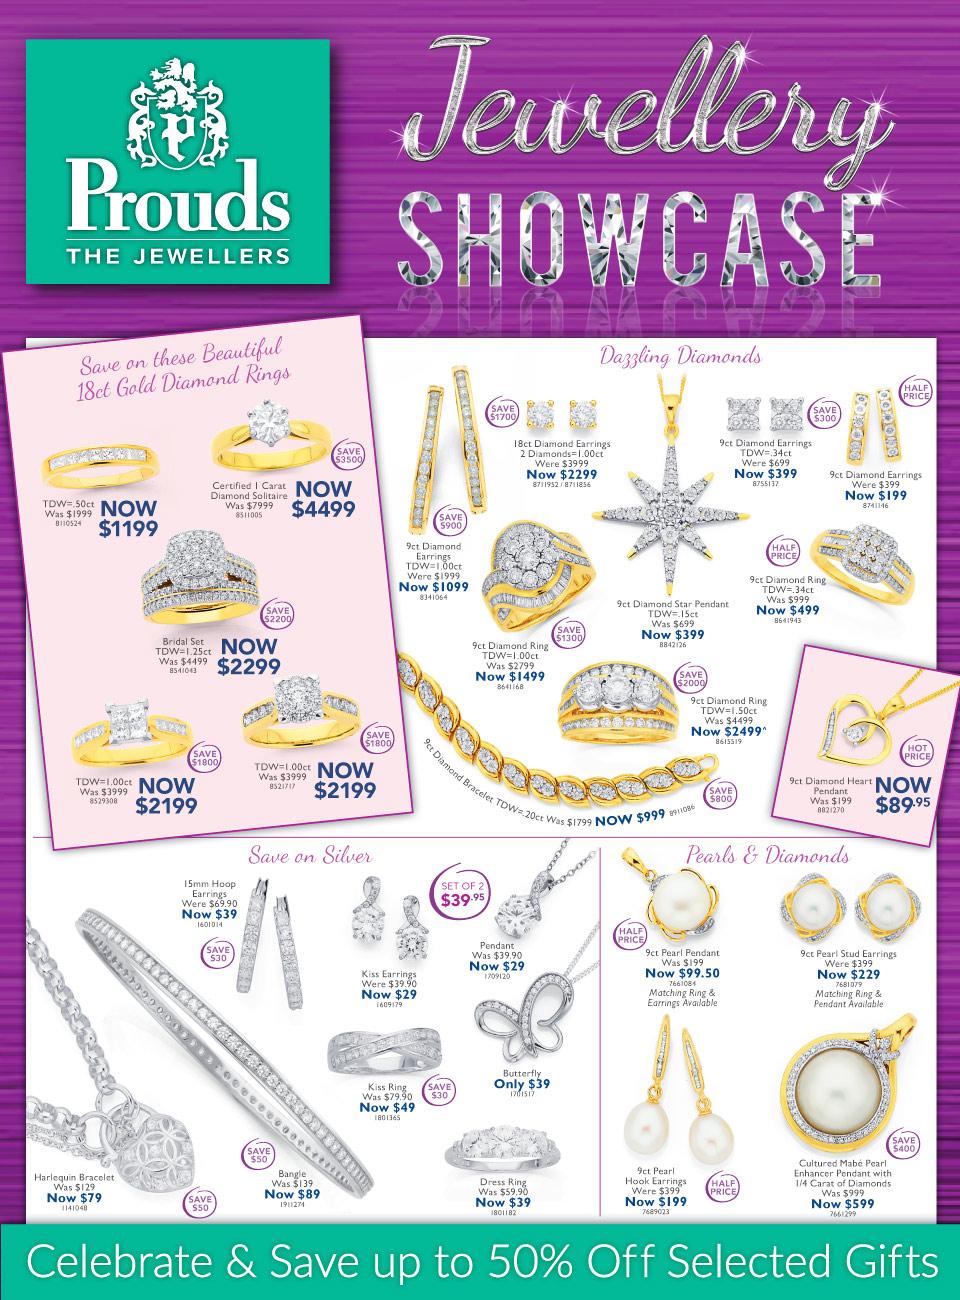 Prouds Catalogue